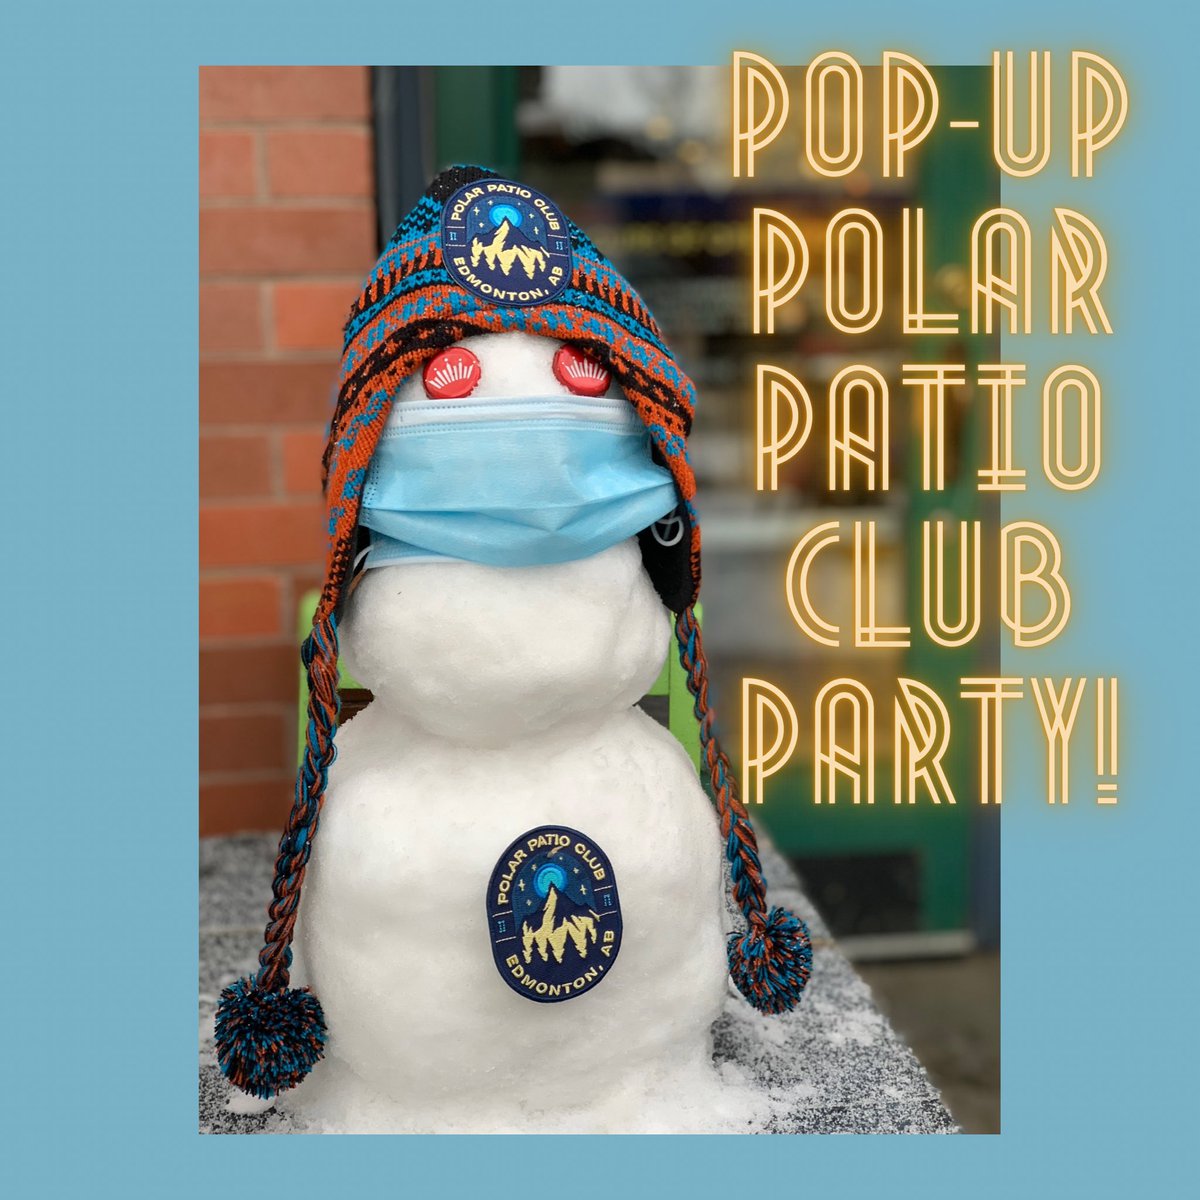 POP-UP POLAR PATIO CLUB PARTY! Happening NOW @icehouseyeg! Runs all evening!

$5 Corona’s and $5 margaritas

Be there!

•
•
⛄️ 
•
•
#WednesdayVibes #PopUpParty #YegWinterCity #PartyTime #Yeg #YegFood #YegDrinks #YegPatio #YegWinterPatio #PolarPatioClub #YegDT